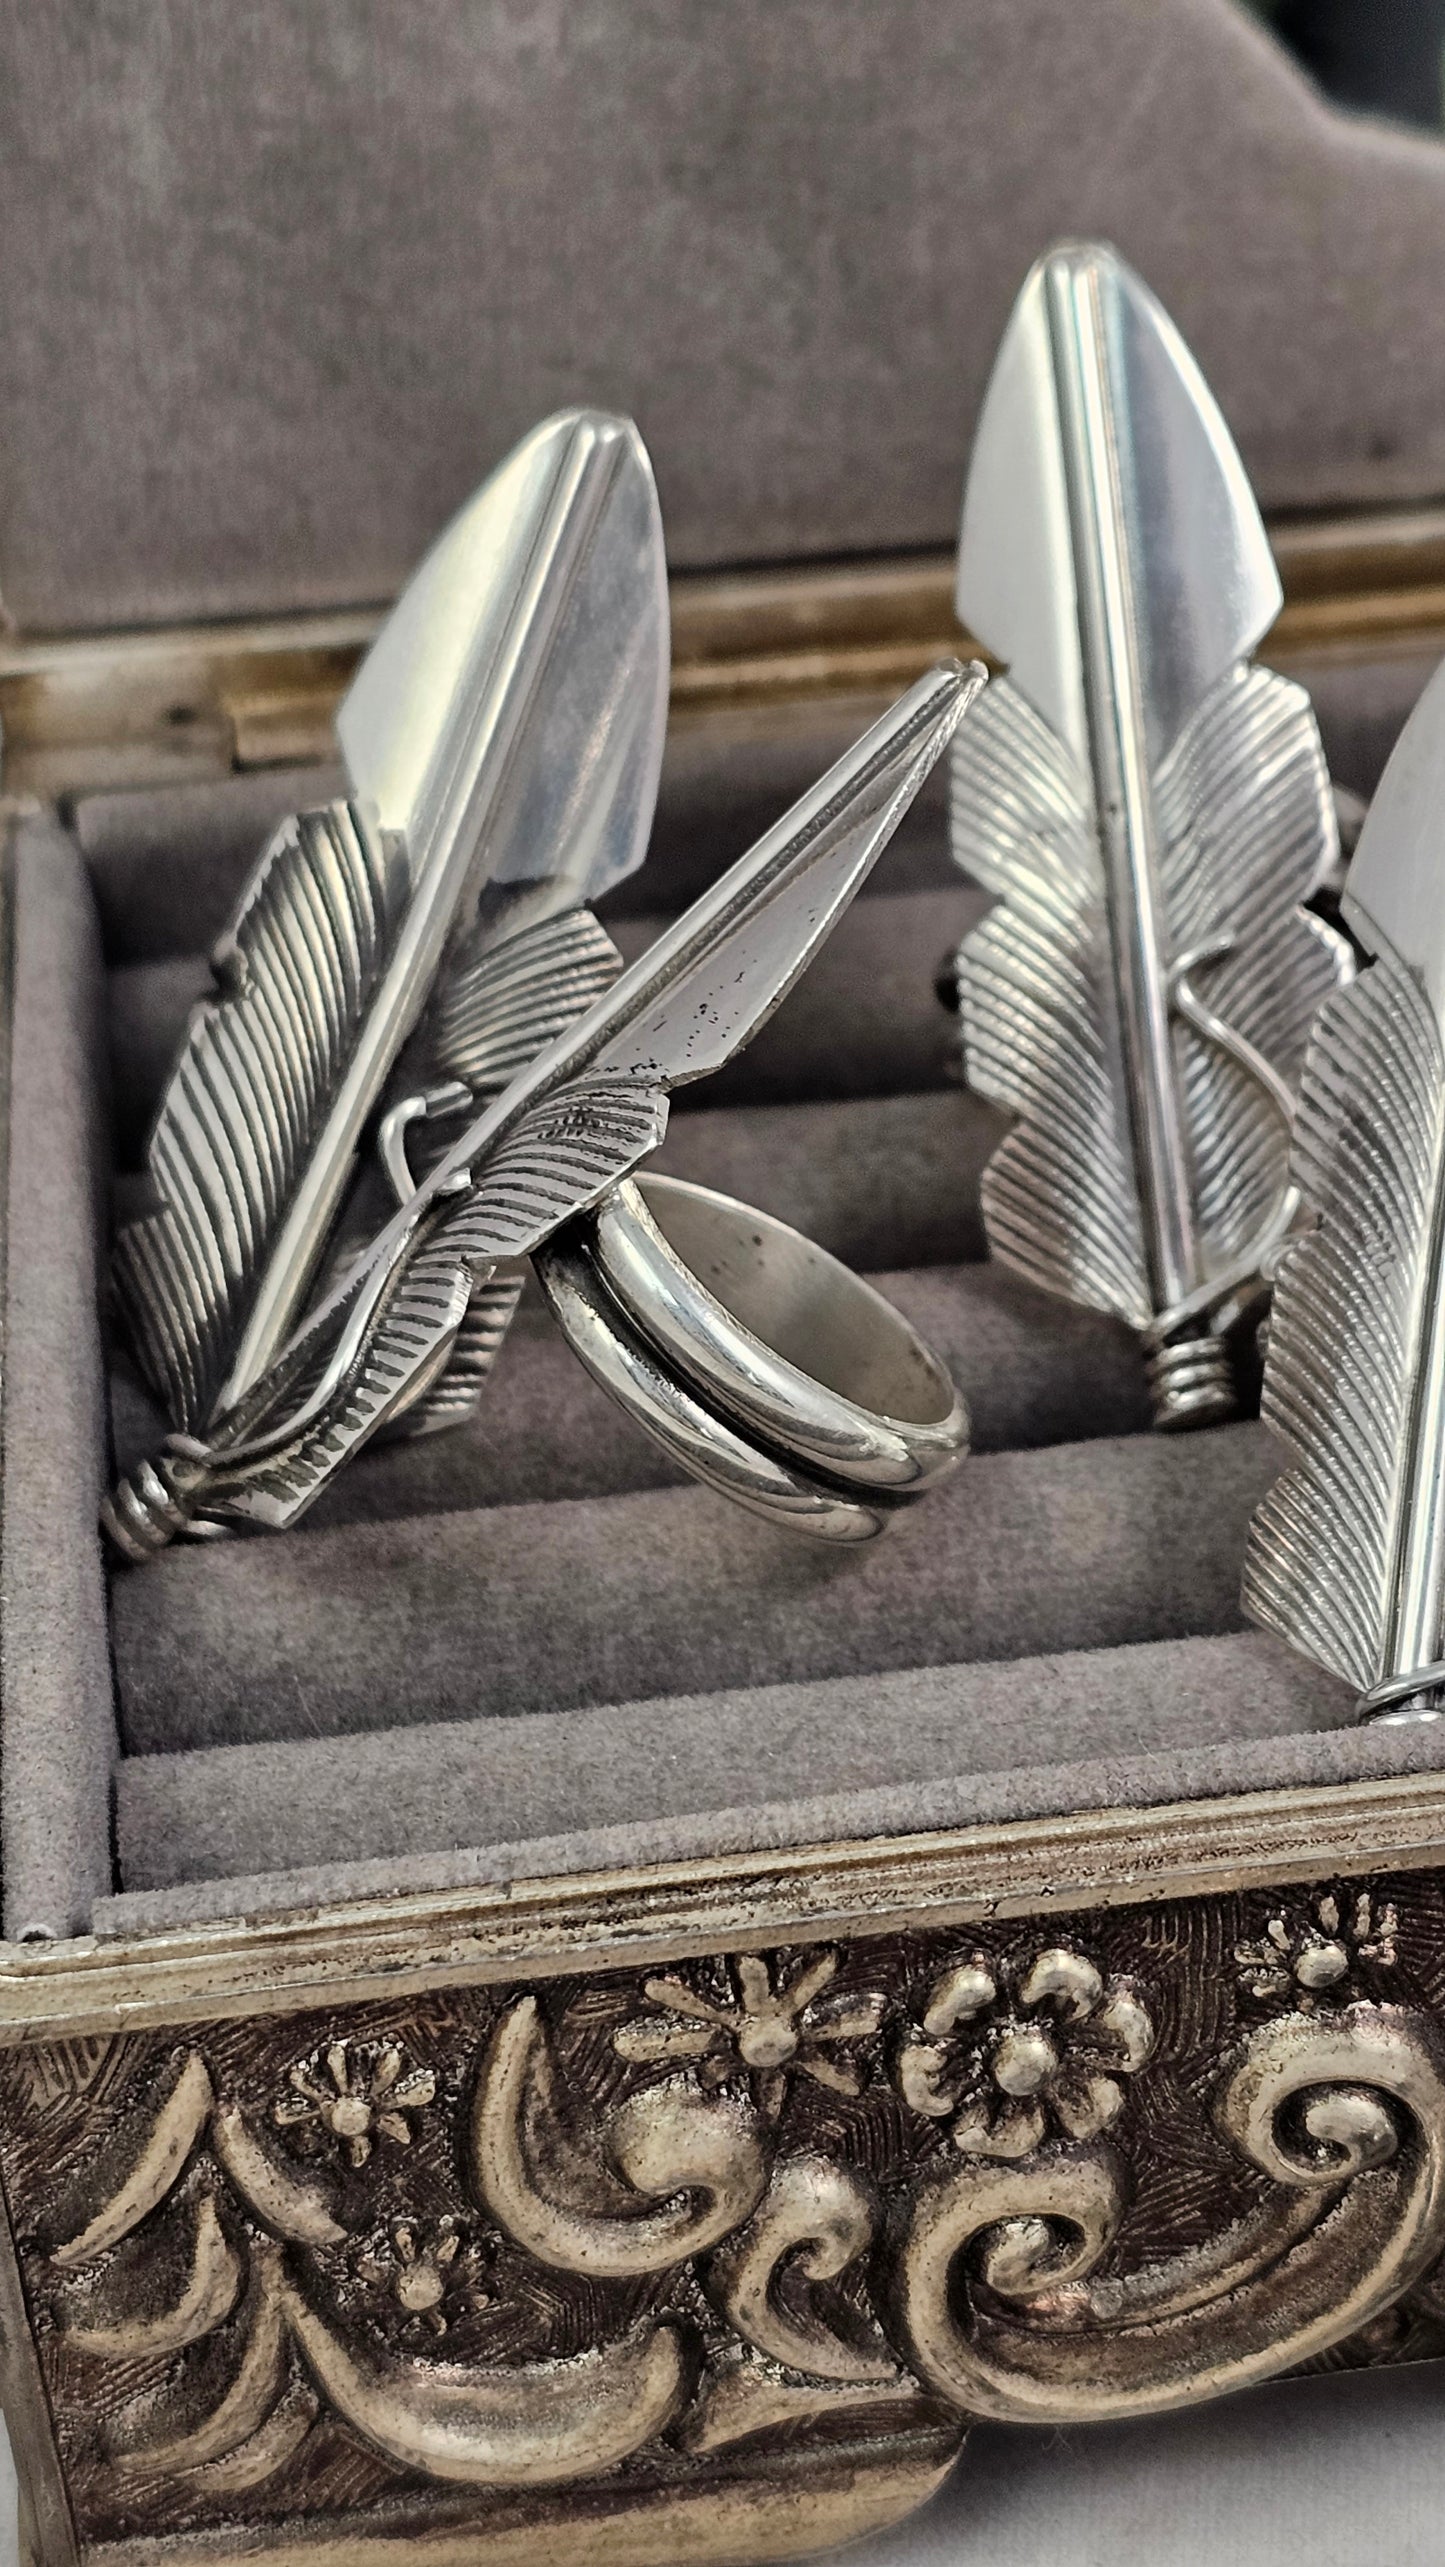 Feather rings